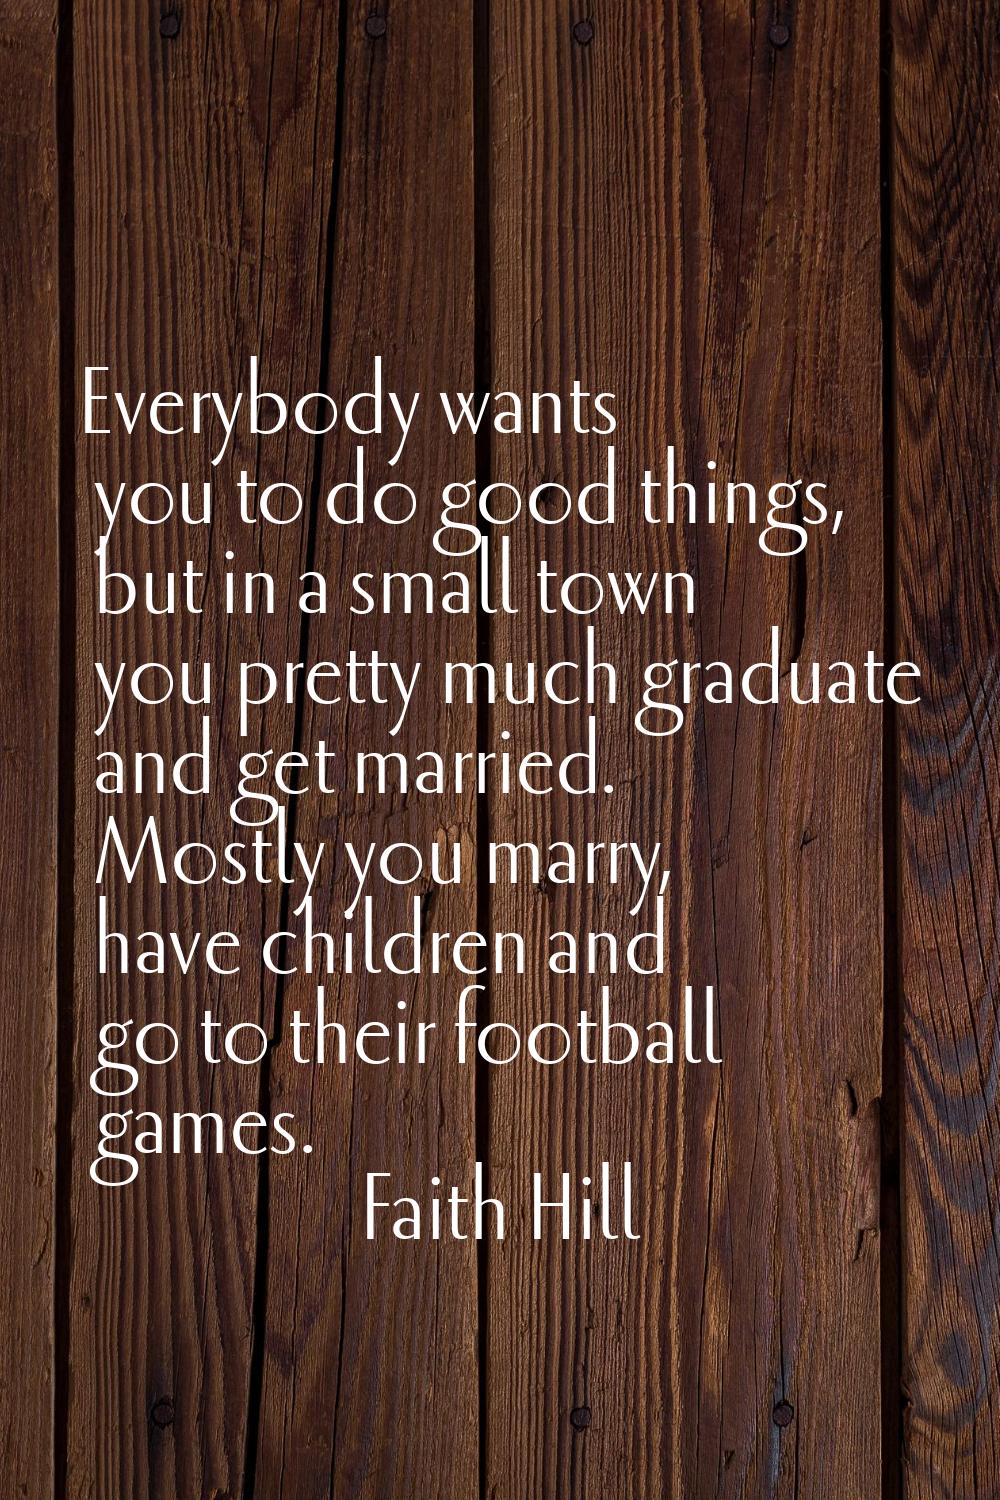 Everybody wants you to do good things, but in a small town you pretty much graduate and get married